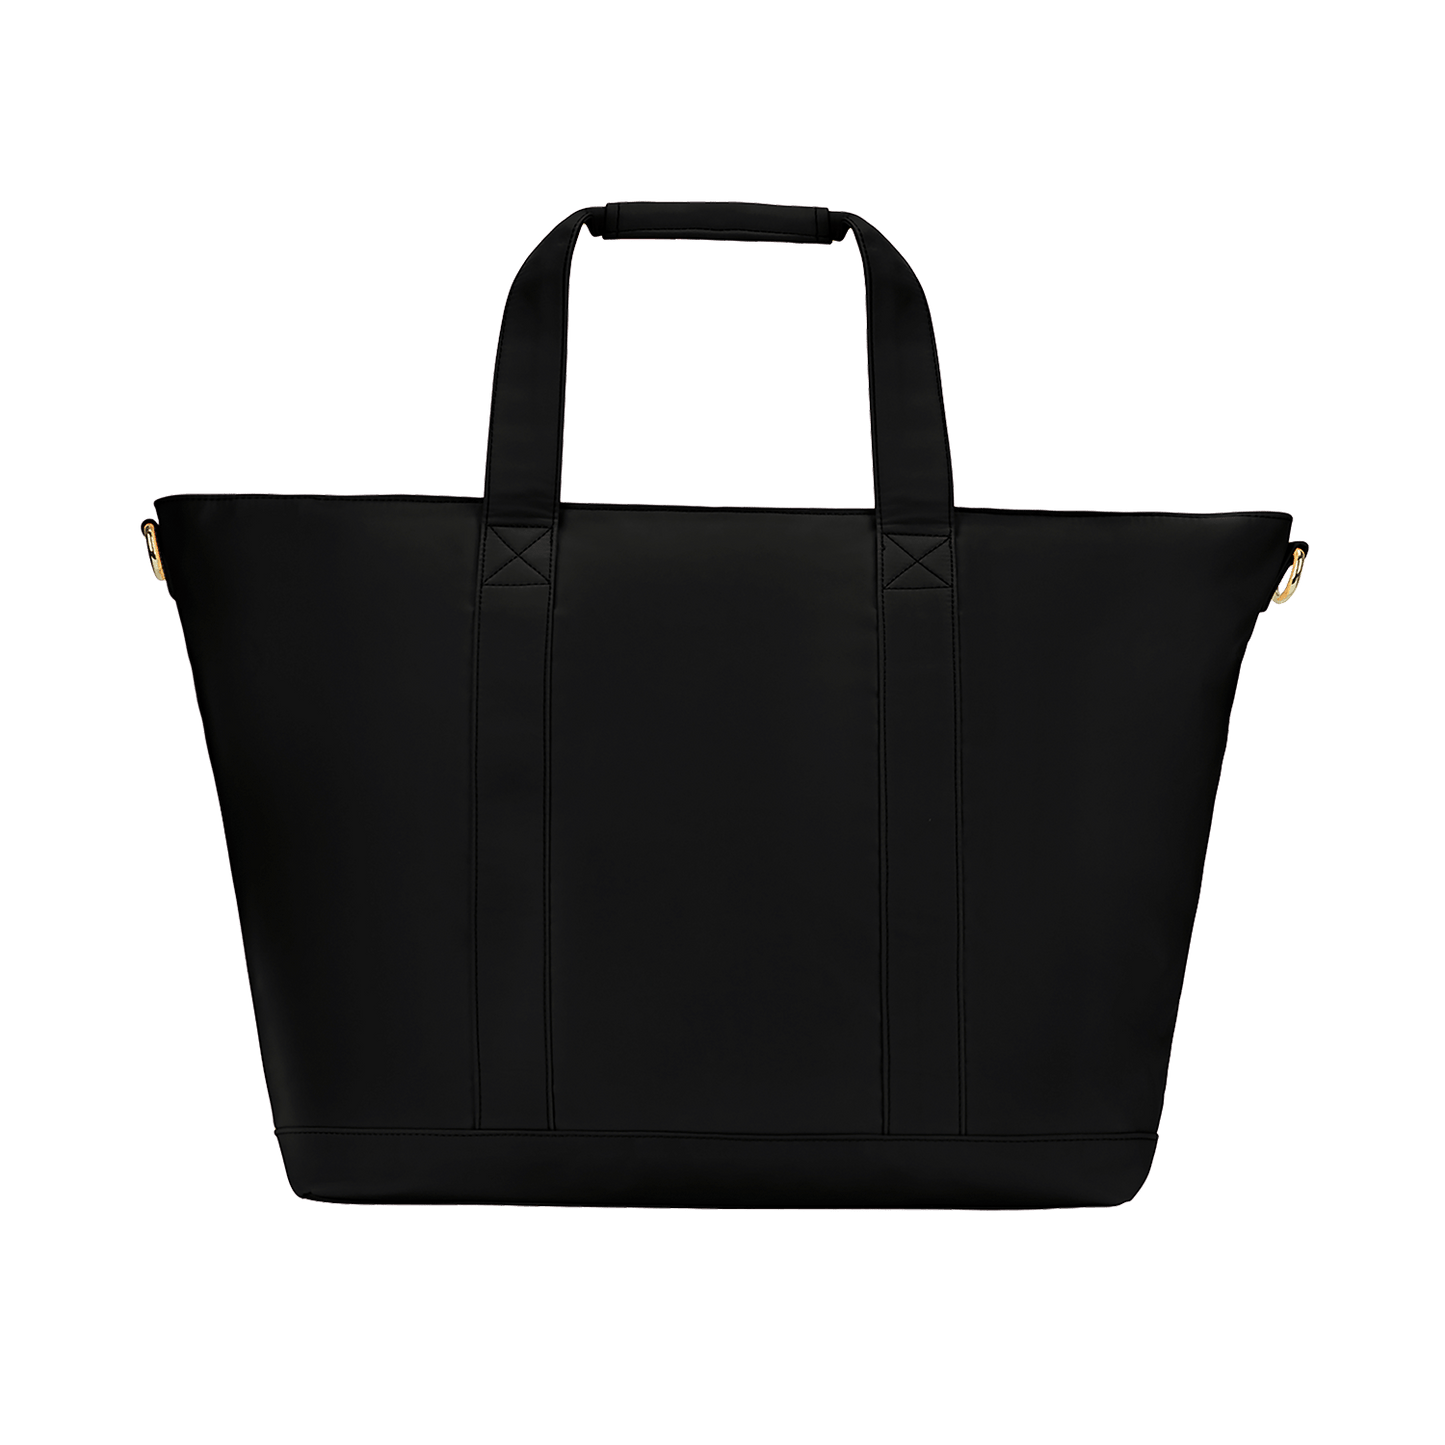 Small Ever-Ready Zip Tote: Women's Handbags, Tote Bags